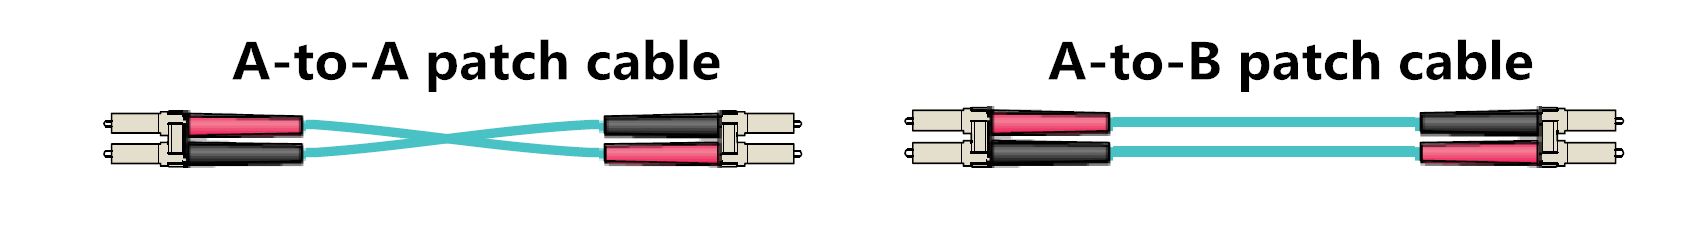 two types of duplex-patch-cable